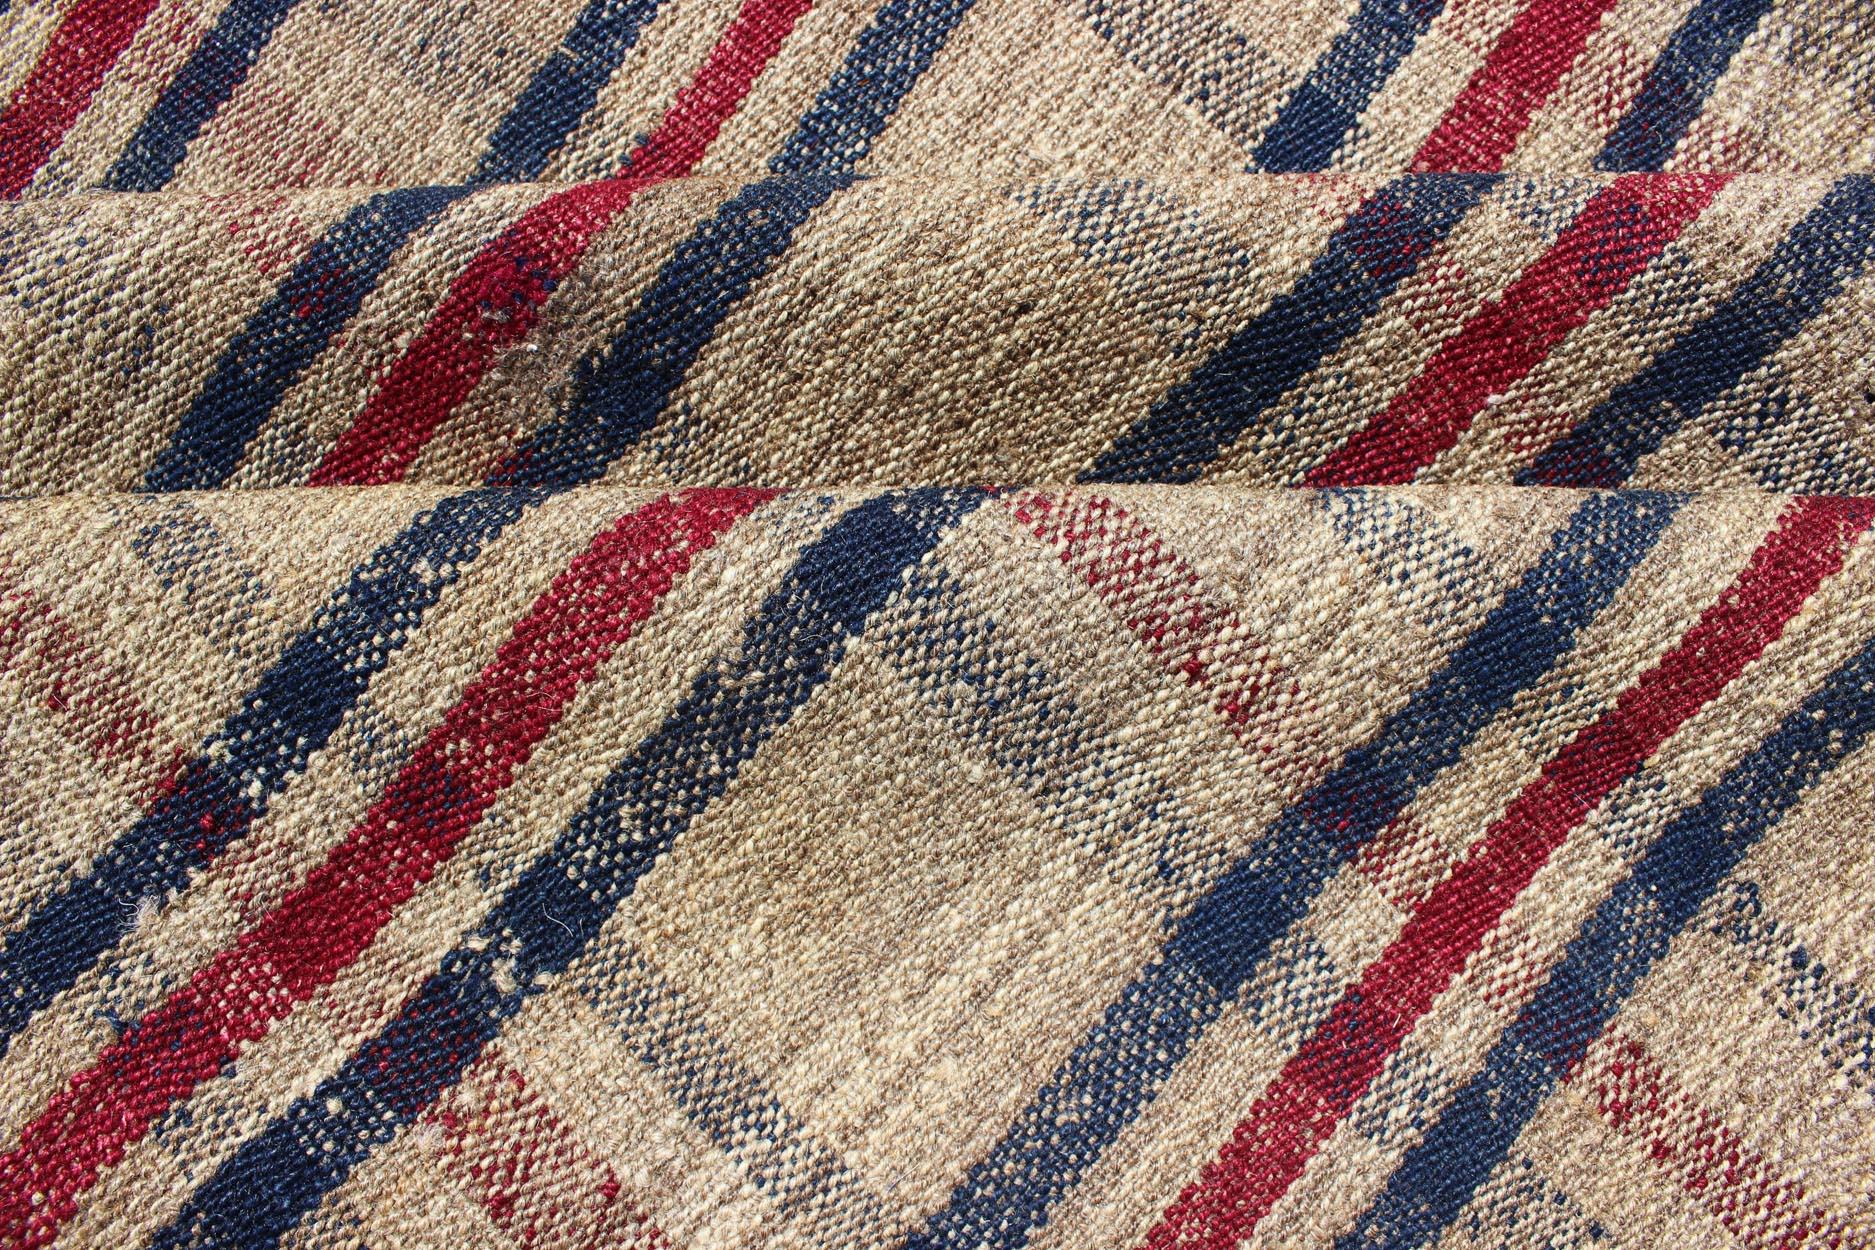 Hand-Woven Plaid Design Vintage Turkish Kilim Rug with Stripes in Red, Navy Blue and Cream For Sale